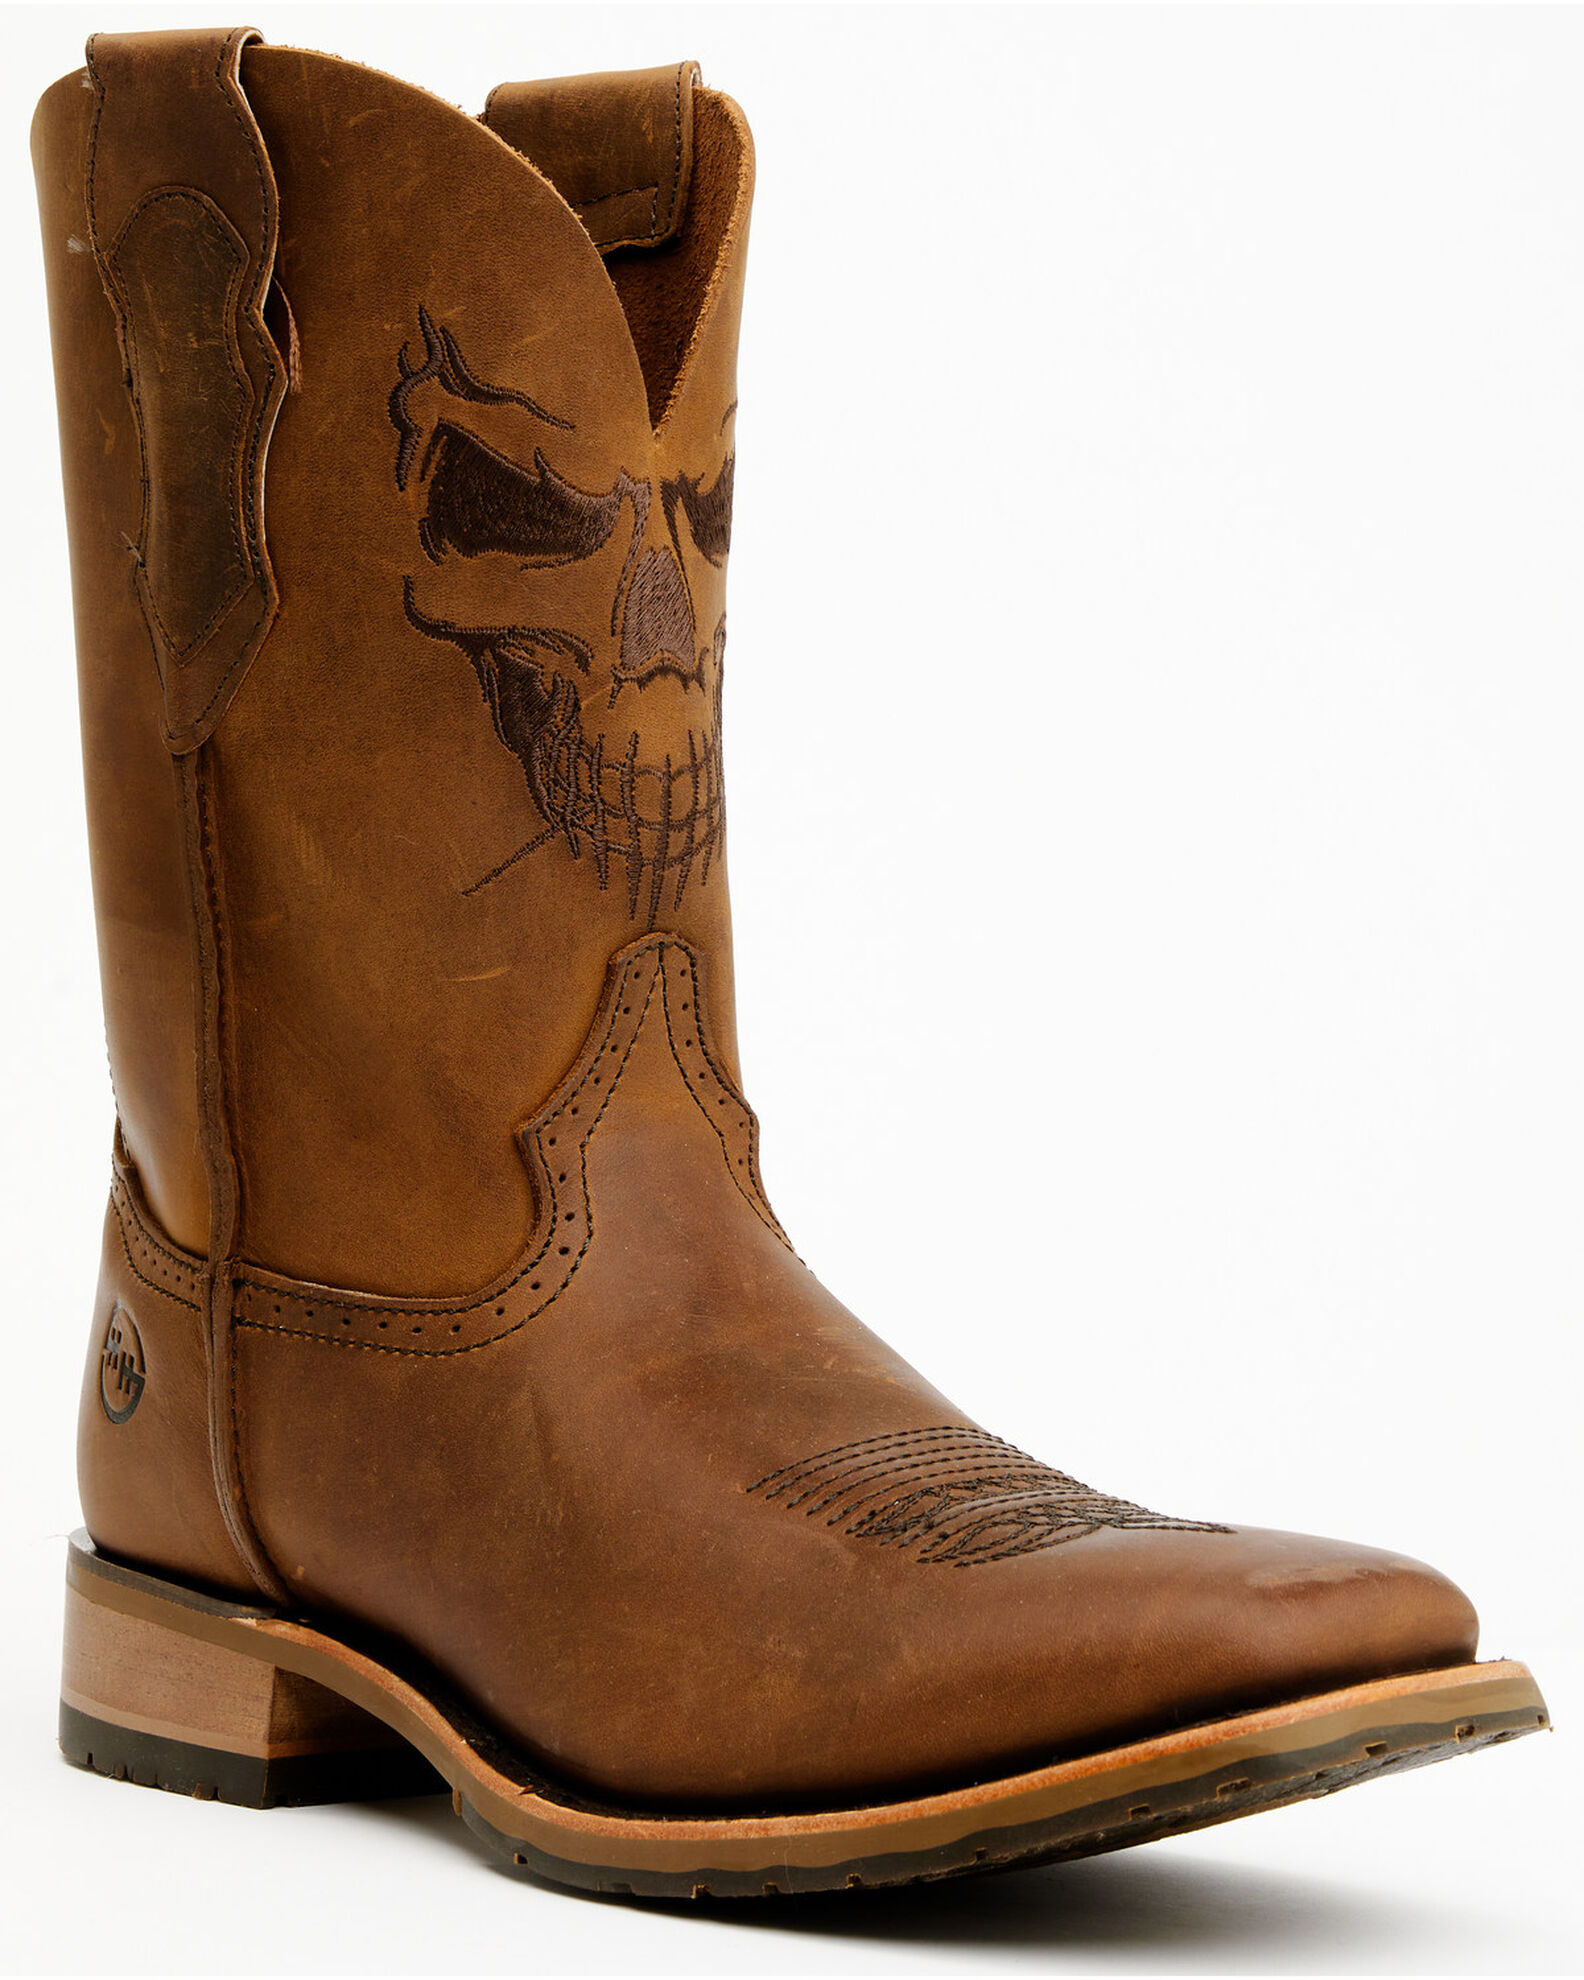 Double H Men's 11" Stockman Ice Roper Western Boots - Broad Square Toe